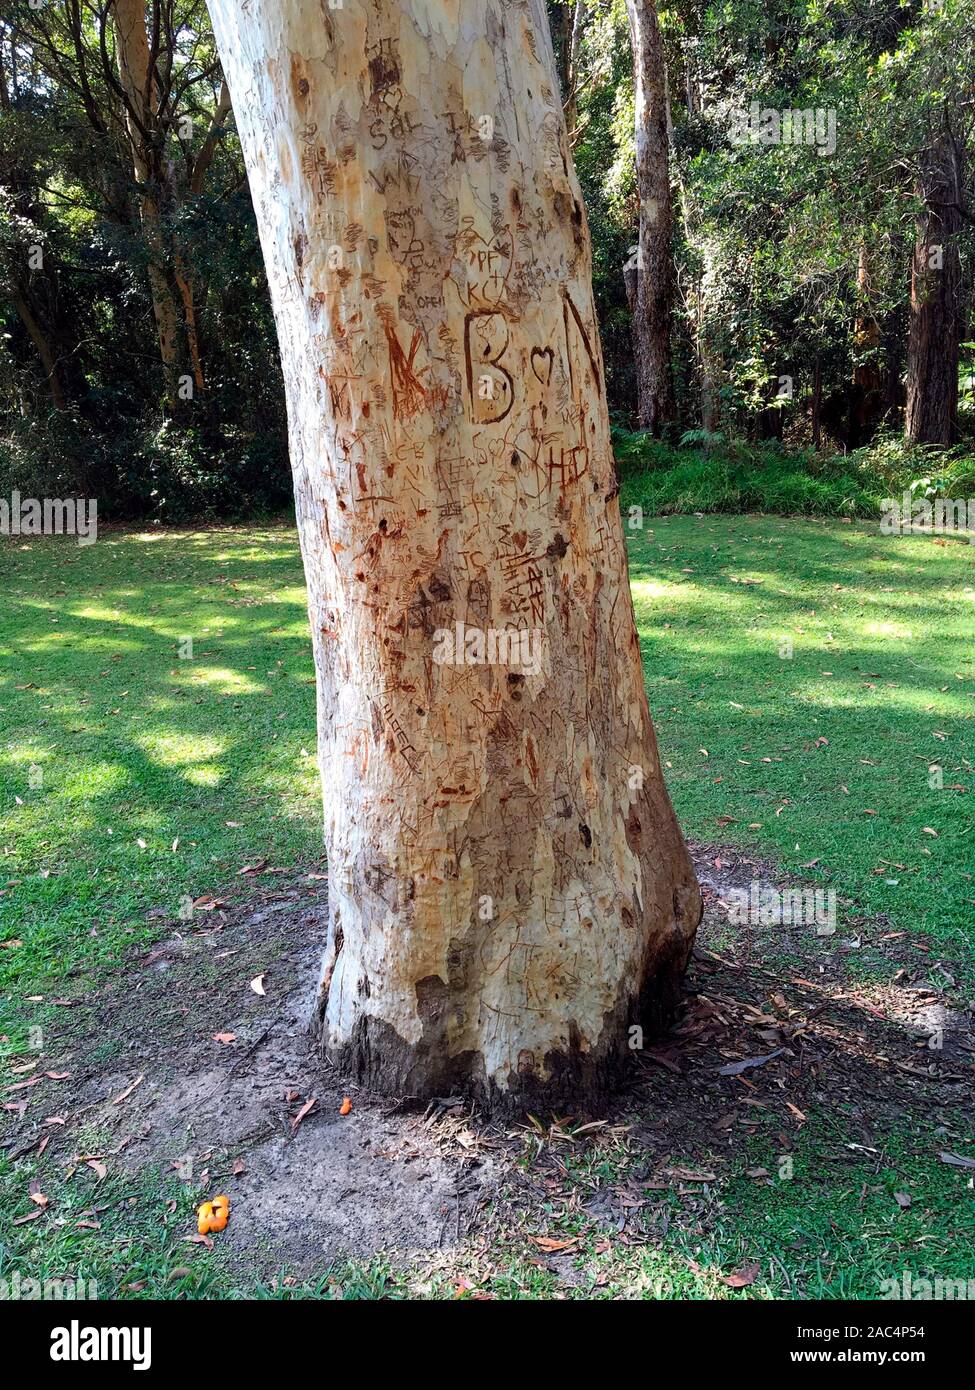 Vandals have carved initials on the trunk of a gum tree in Coffs Harbour botanical garden, NSW mid-north coast Australia Stock Photo